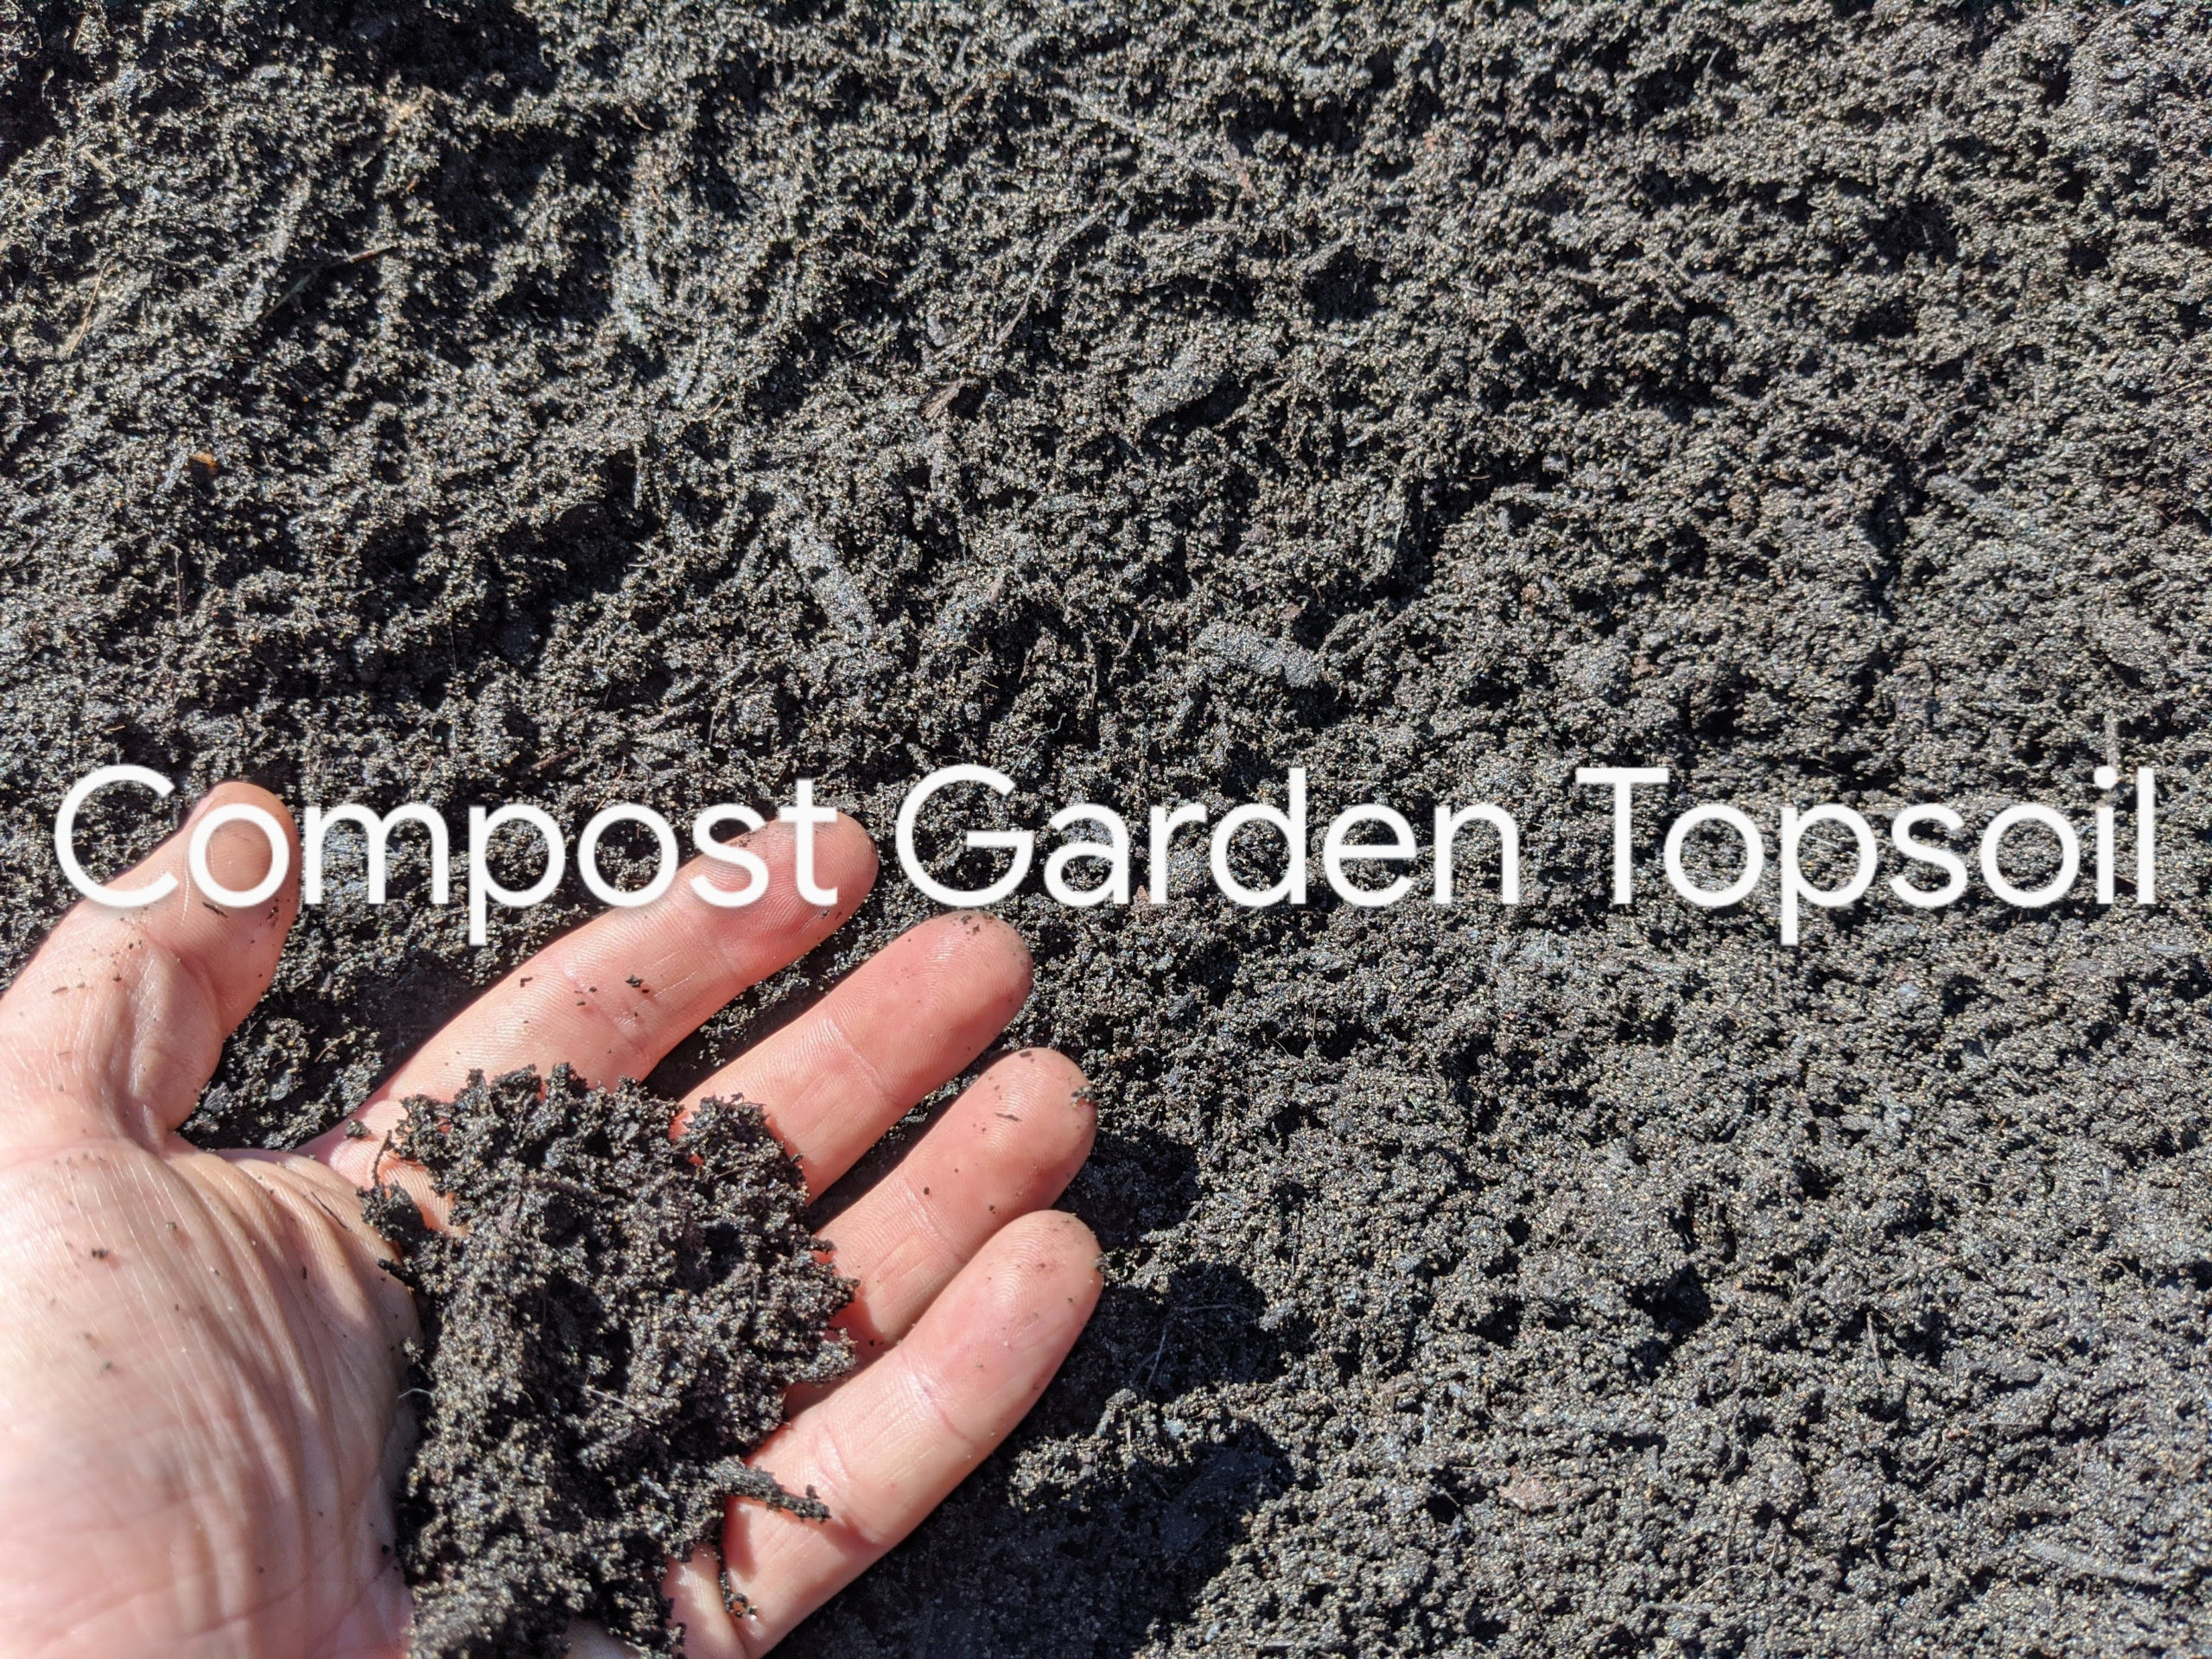 Compost Garden Top Soil for home delivery Vancouver